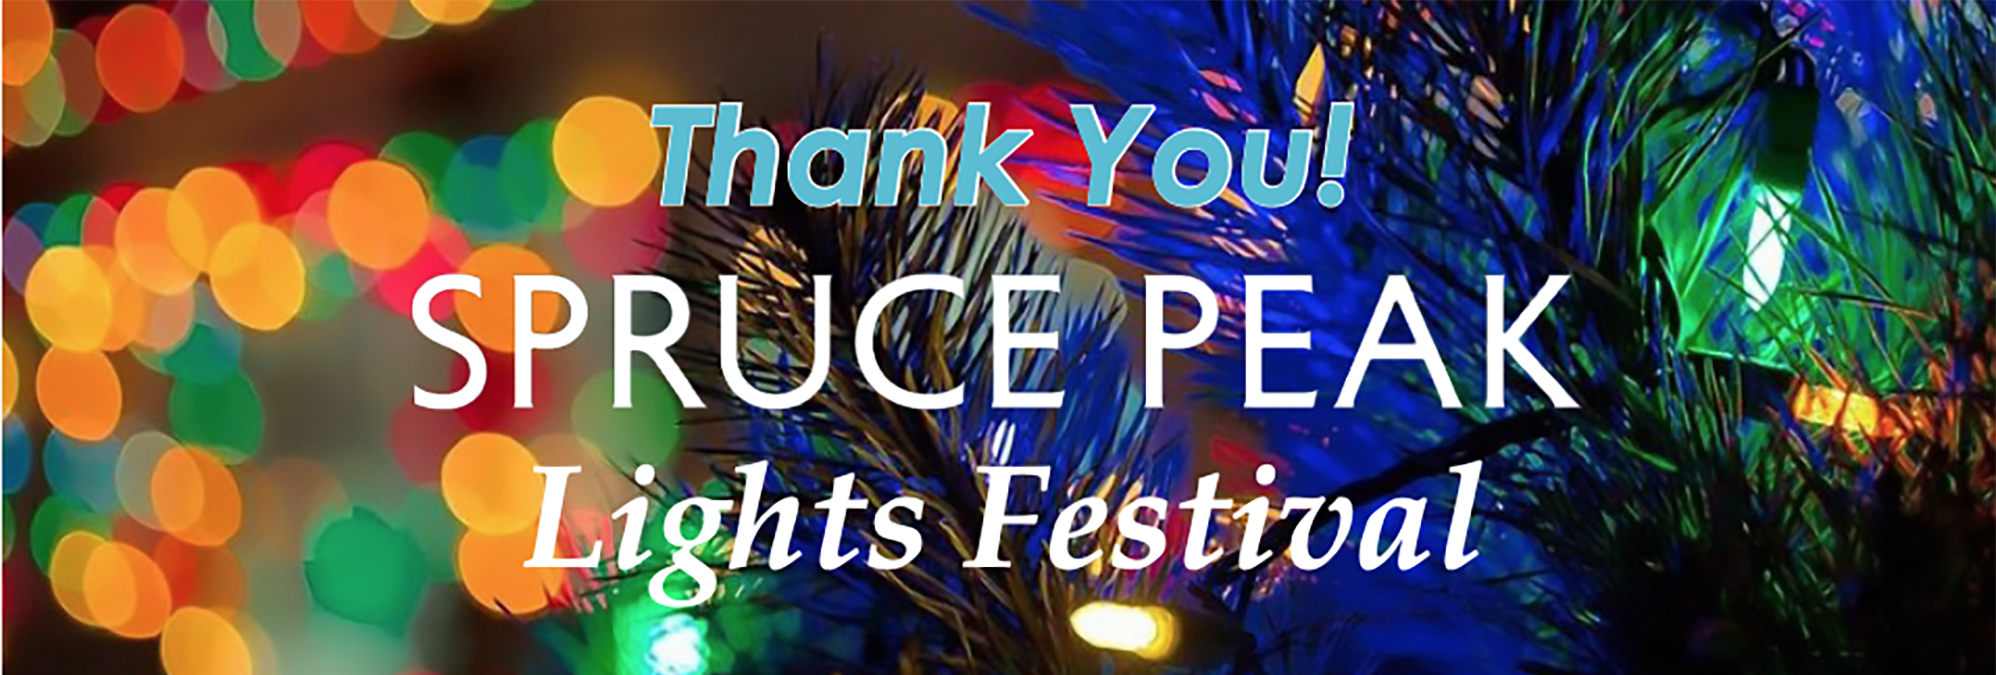 Blurred image of Christmas tree with lights and Thank You Spruce Peak Lights Festival white type